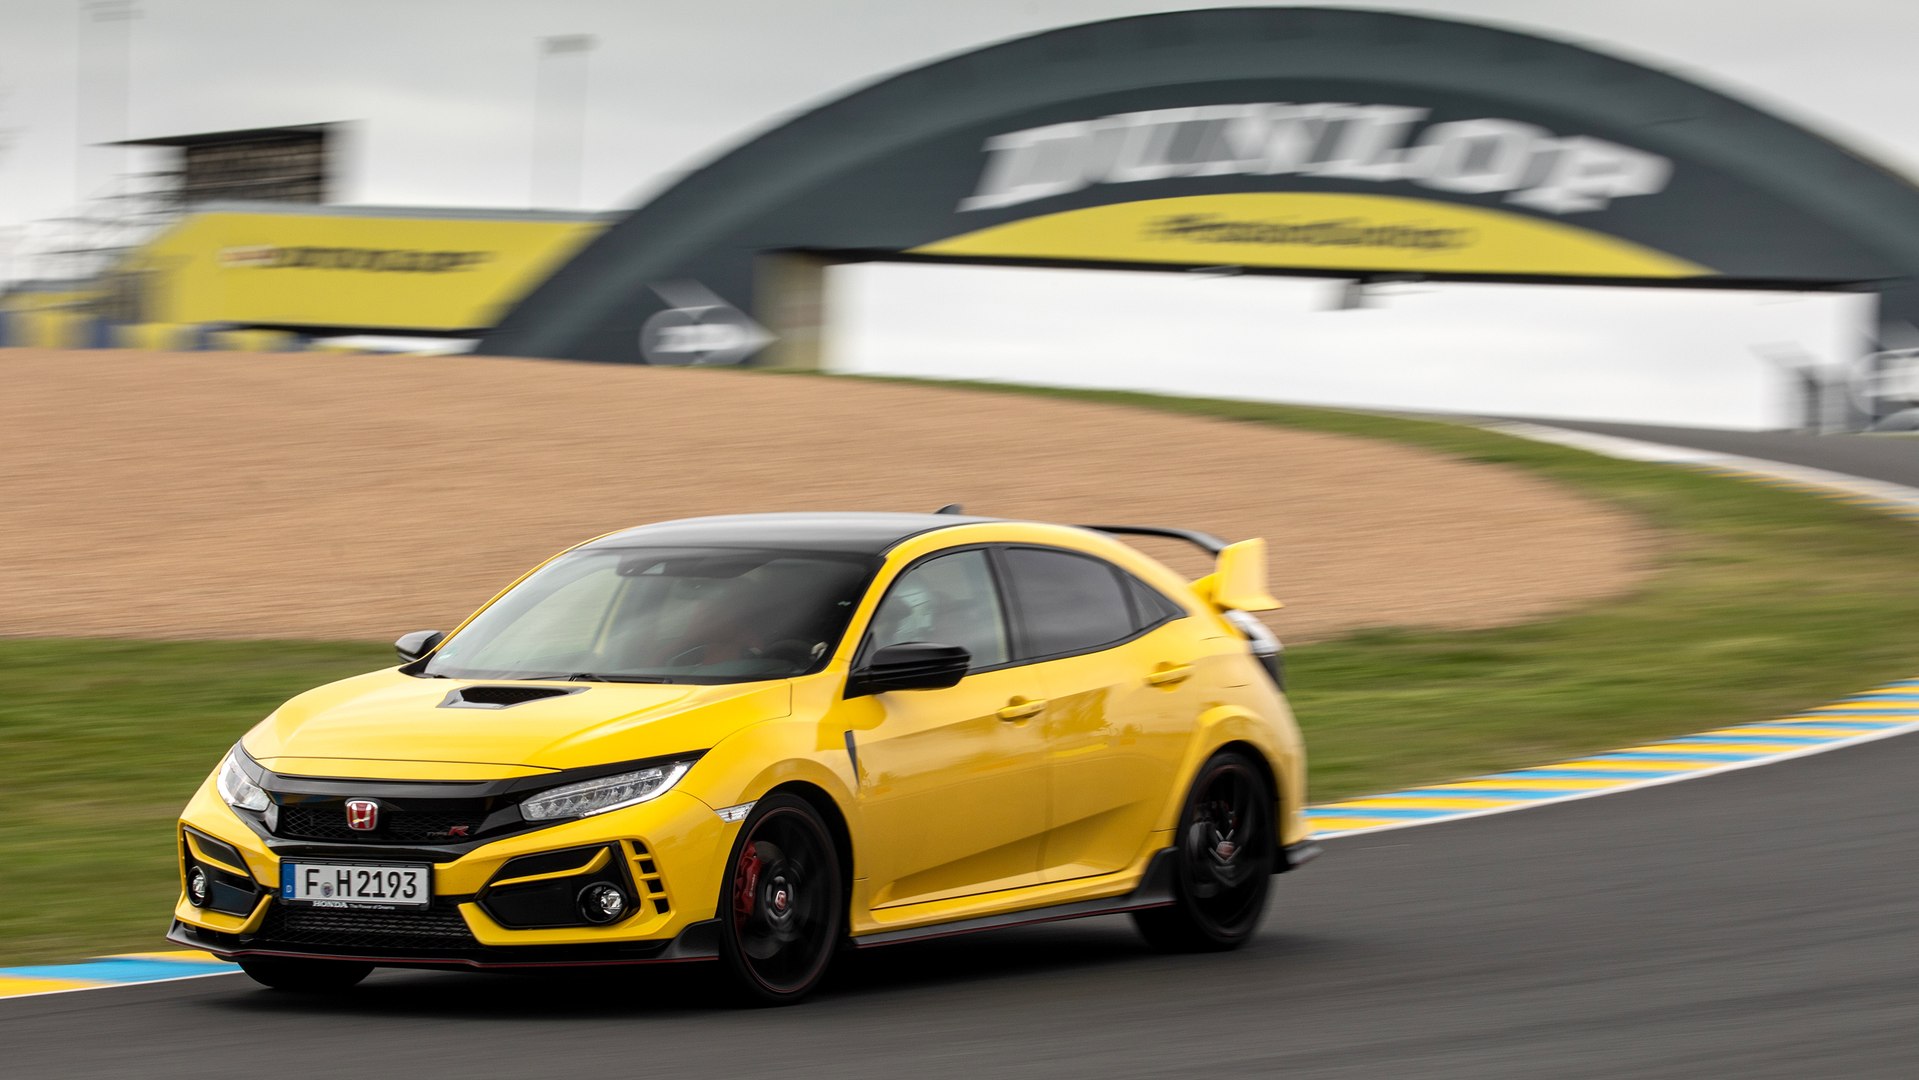 Supertest Honda Civic Type R Limited Edition 21 Video Dailymotion